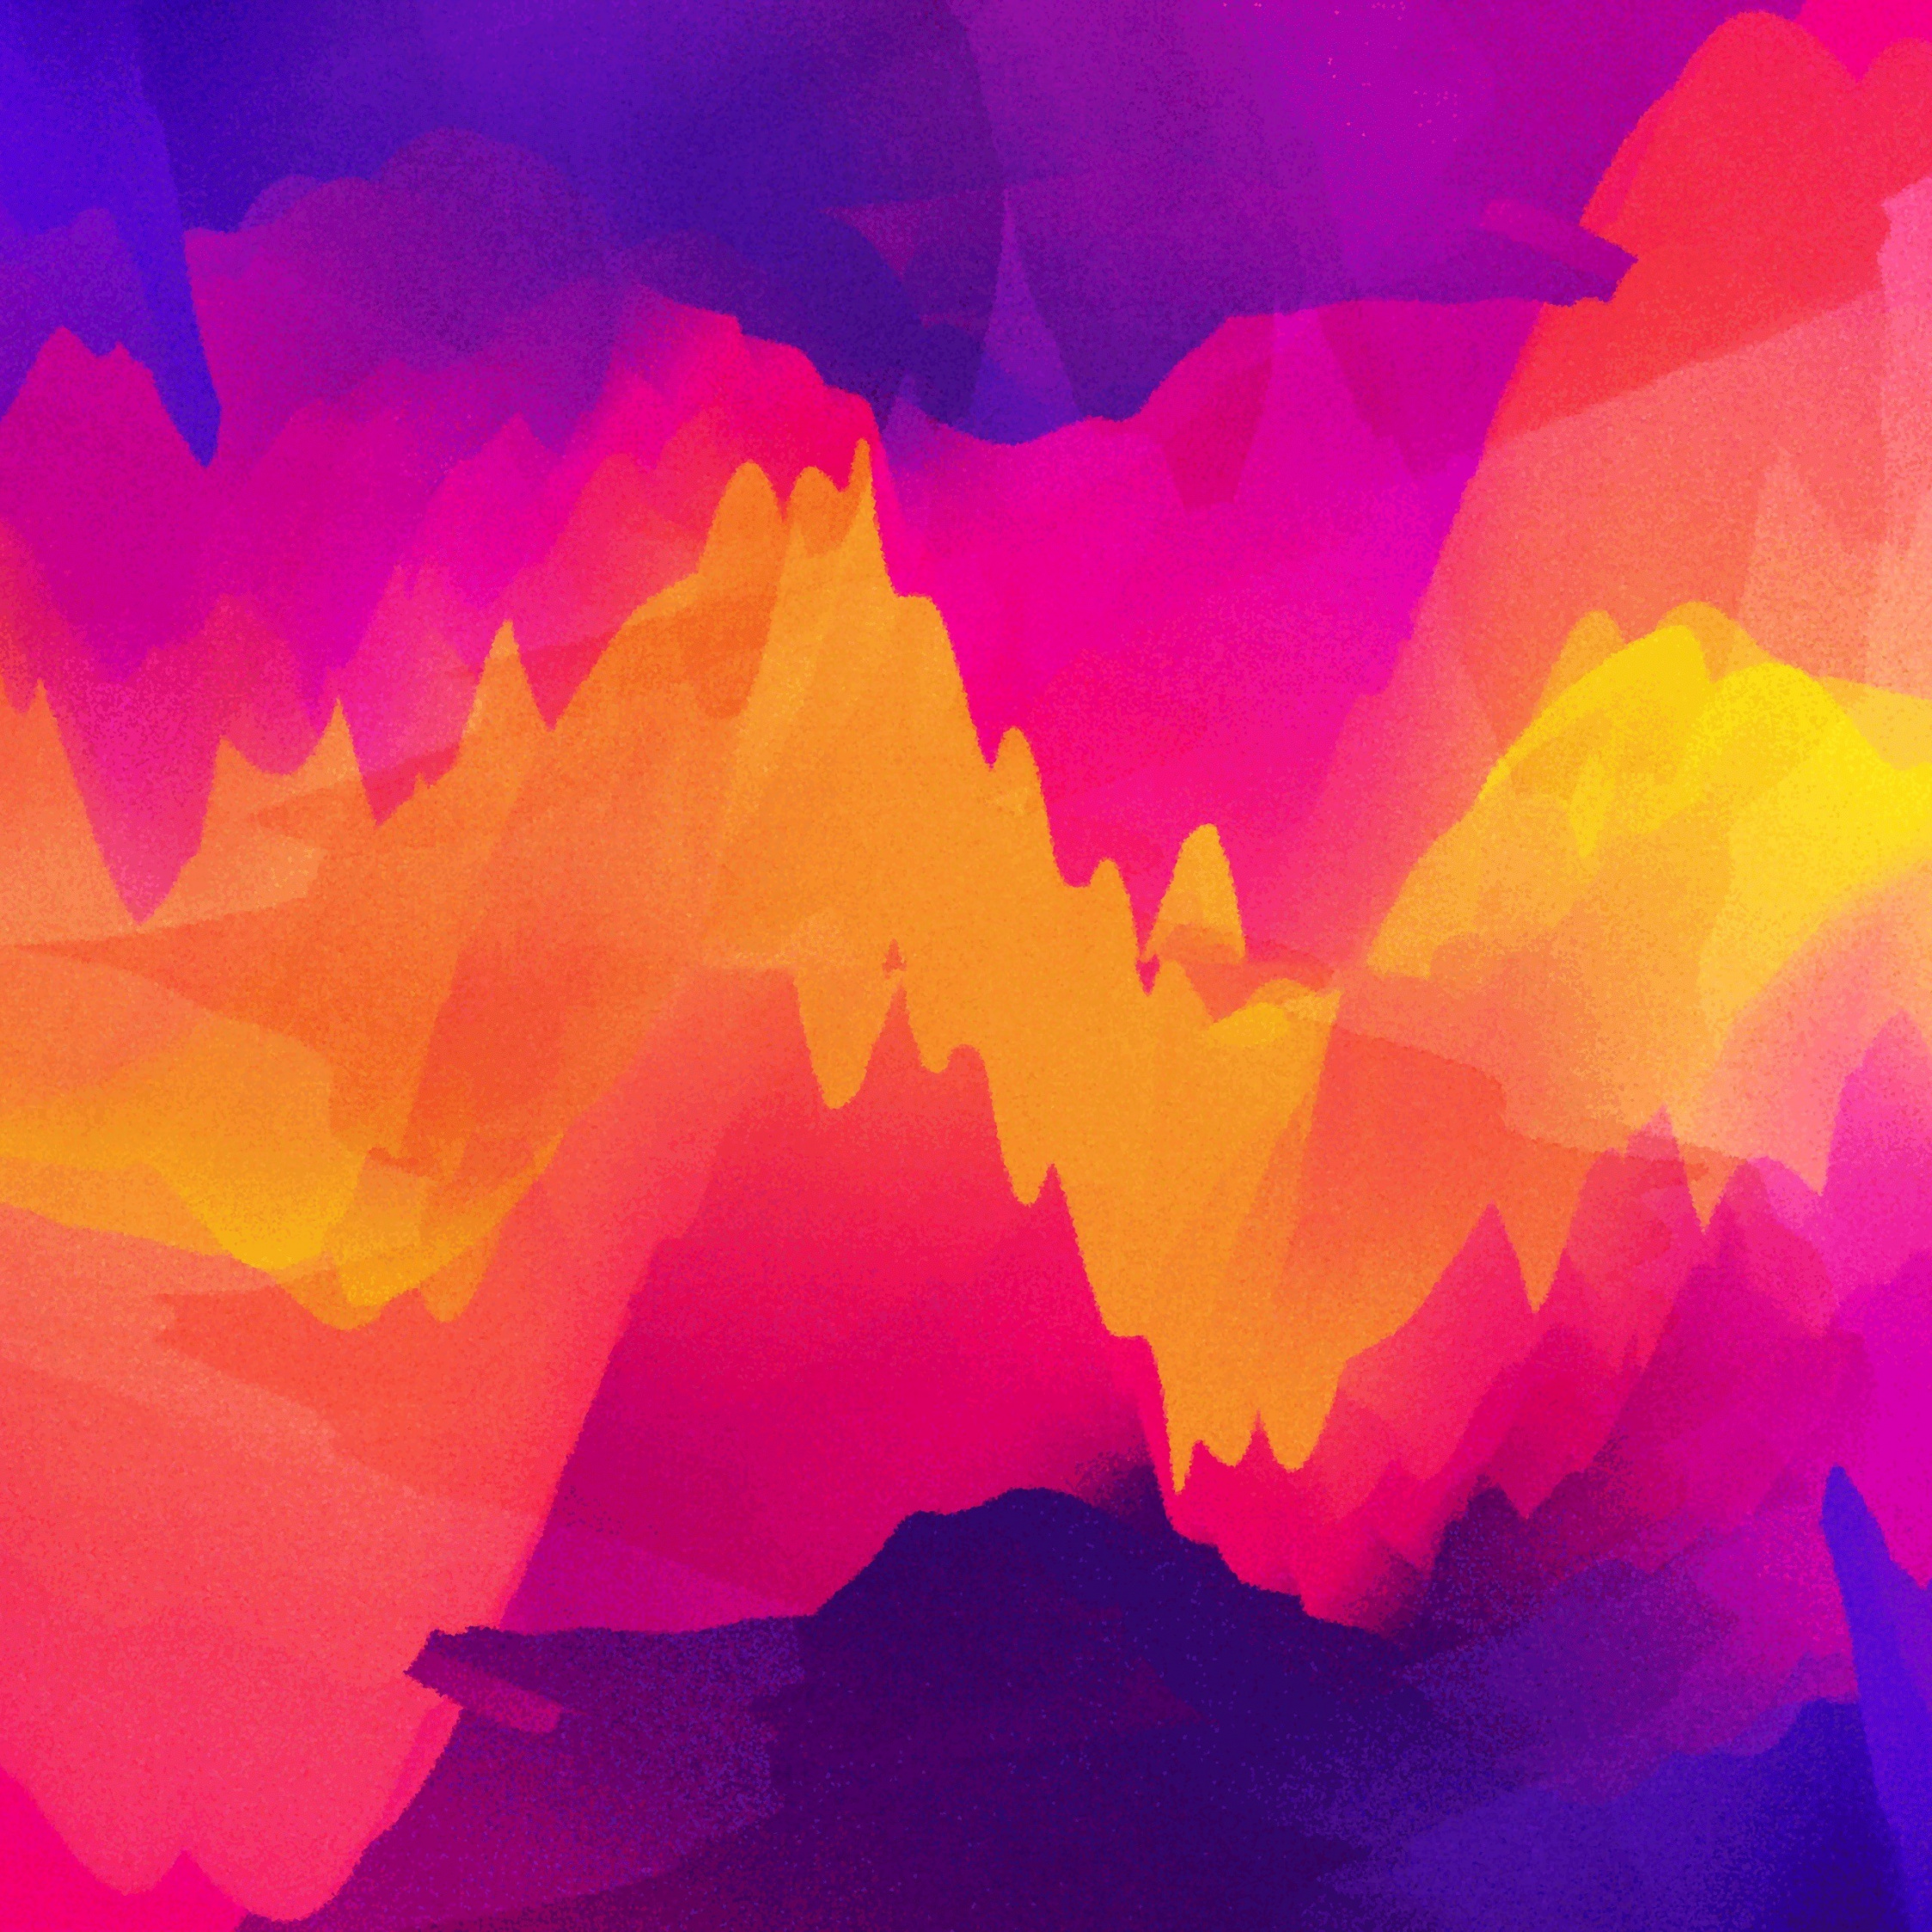 Download 2248x2248 wallpaper colorful, abstract, color